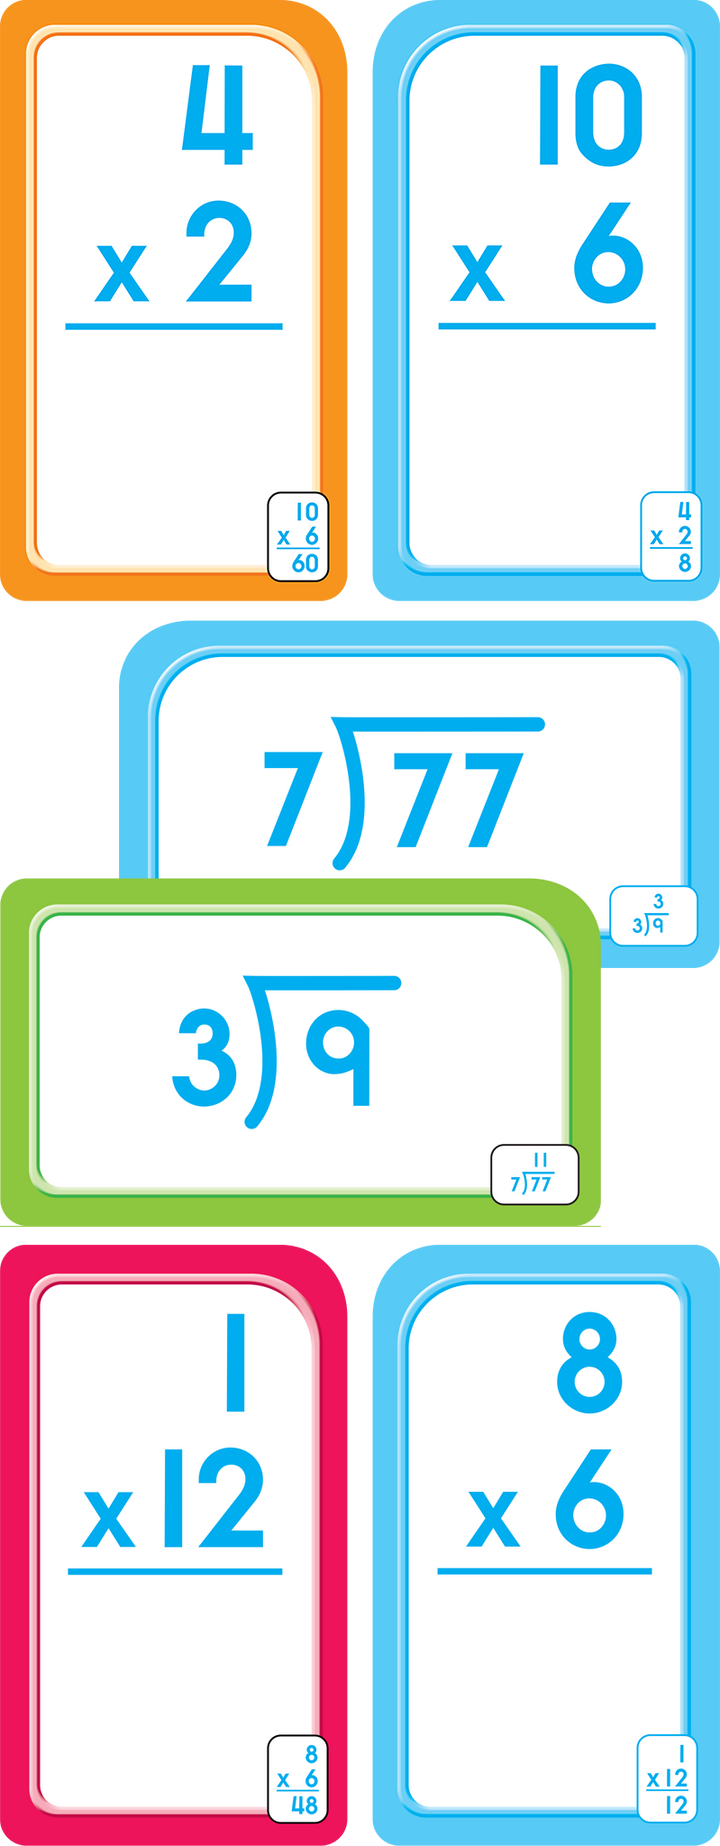 Kids increase speed and sharpen multiplication skills with Get Ready Flash Cards Multiplication & Division  2-Pack Grades 3-4.